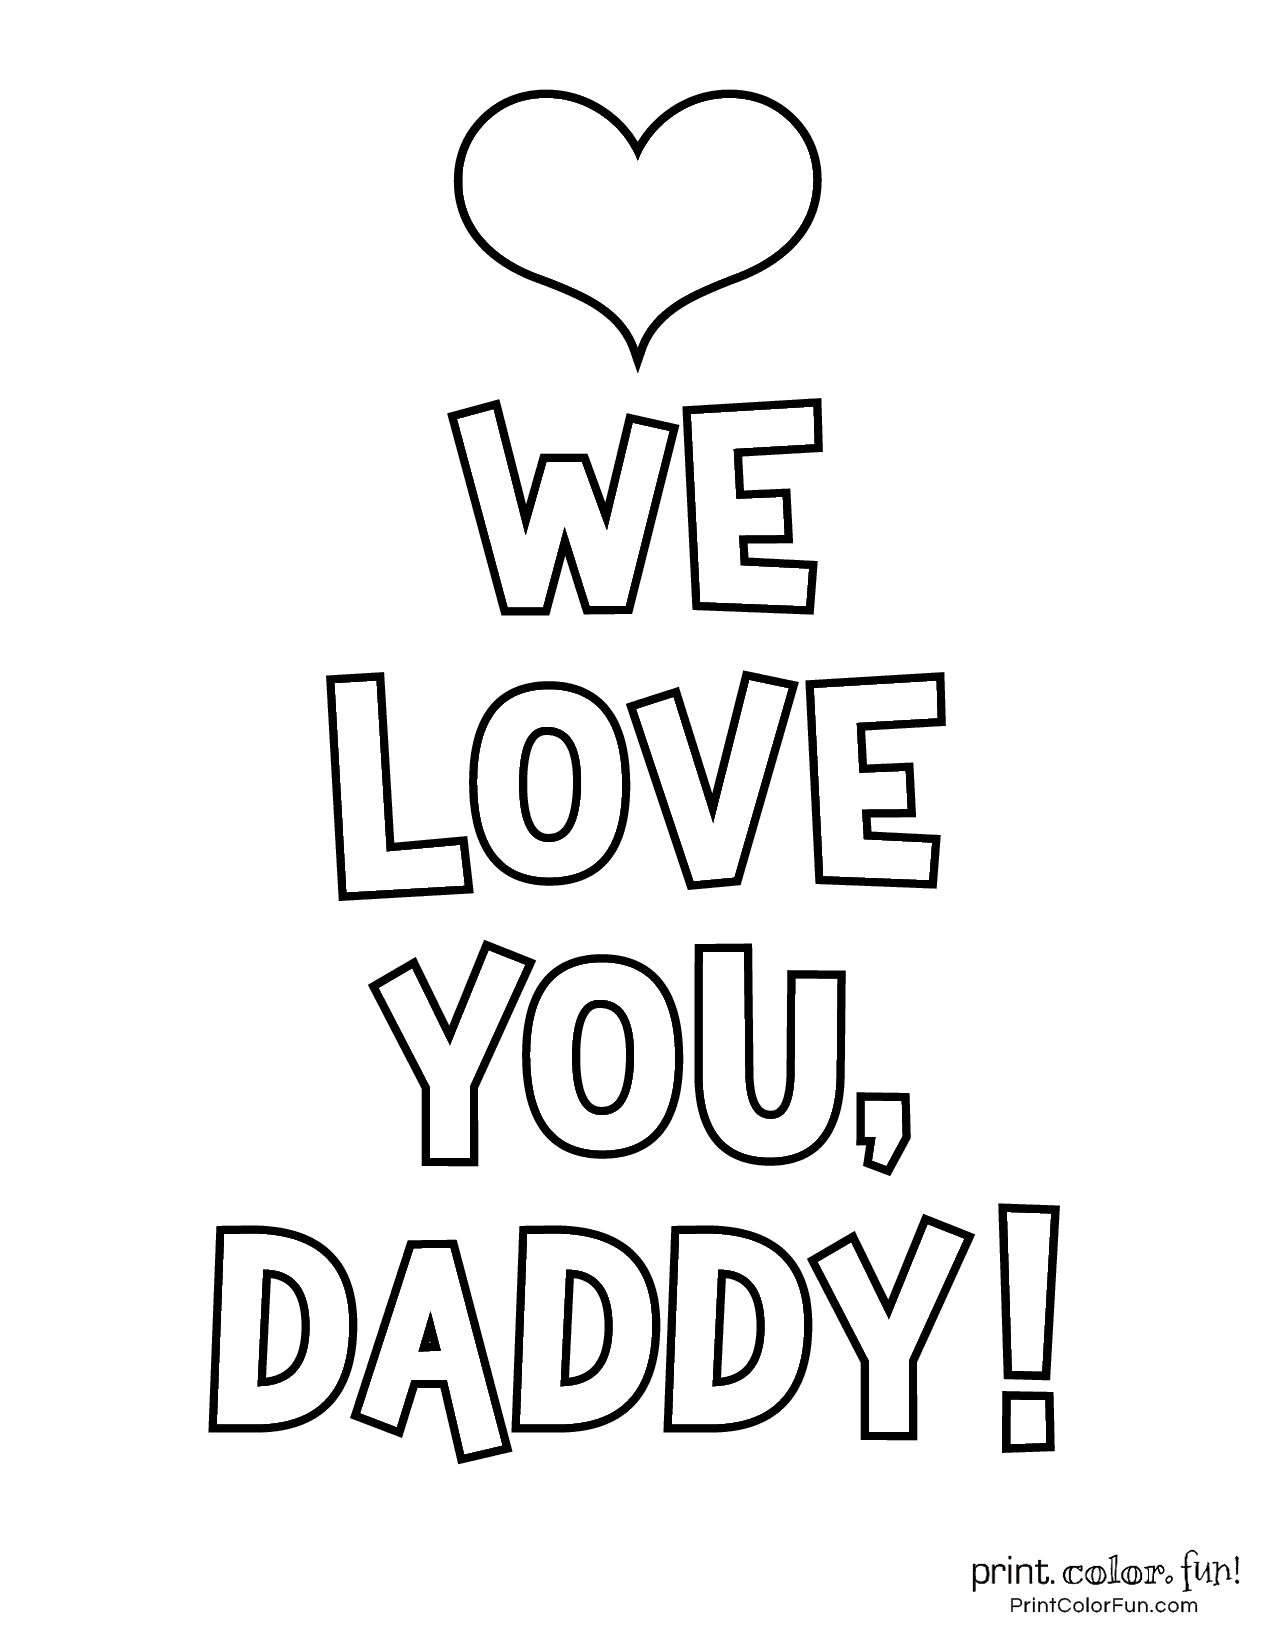 Yes daddy coloring pages